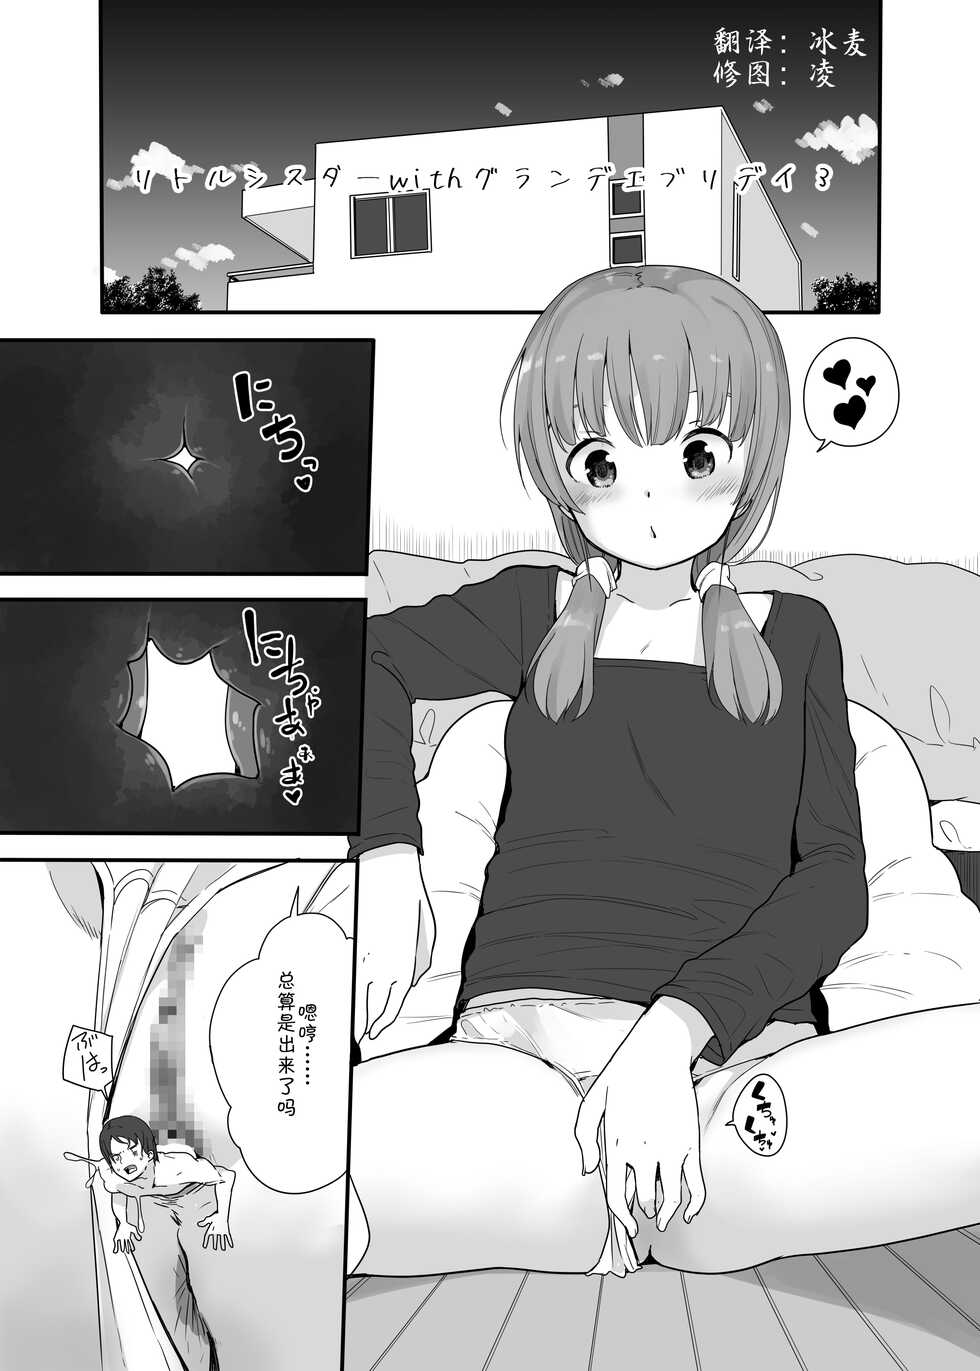 [Fuyuno Mikan] Little Sister With Grande Everyday 3 [Chinese] [冰凌汉化] - Page 1